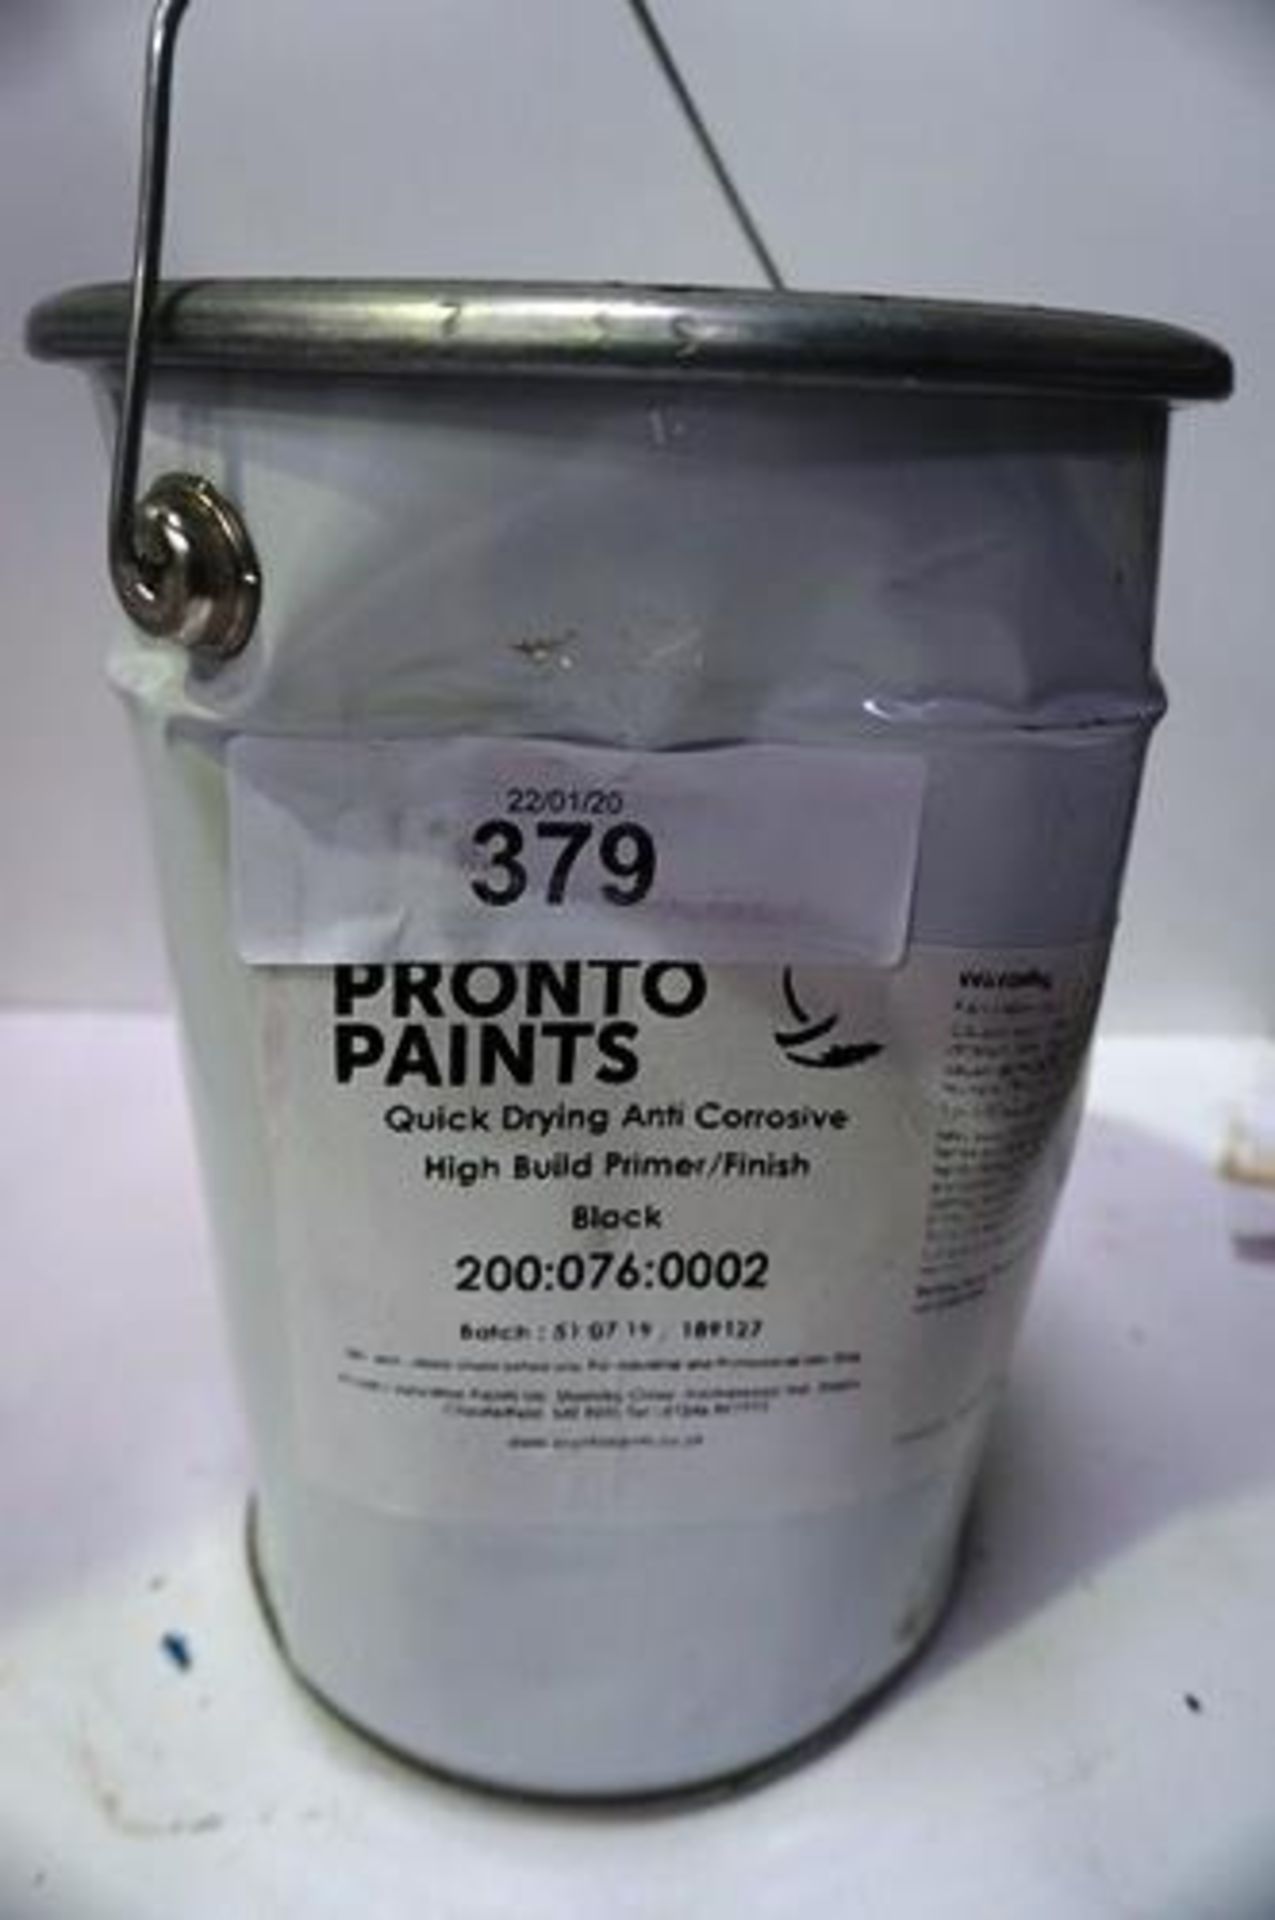 1 x 5ltr tin of Pronto Paint quick drying anti-corrosion high build black primer, manufacturer